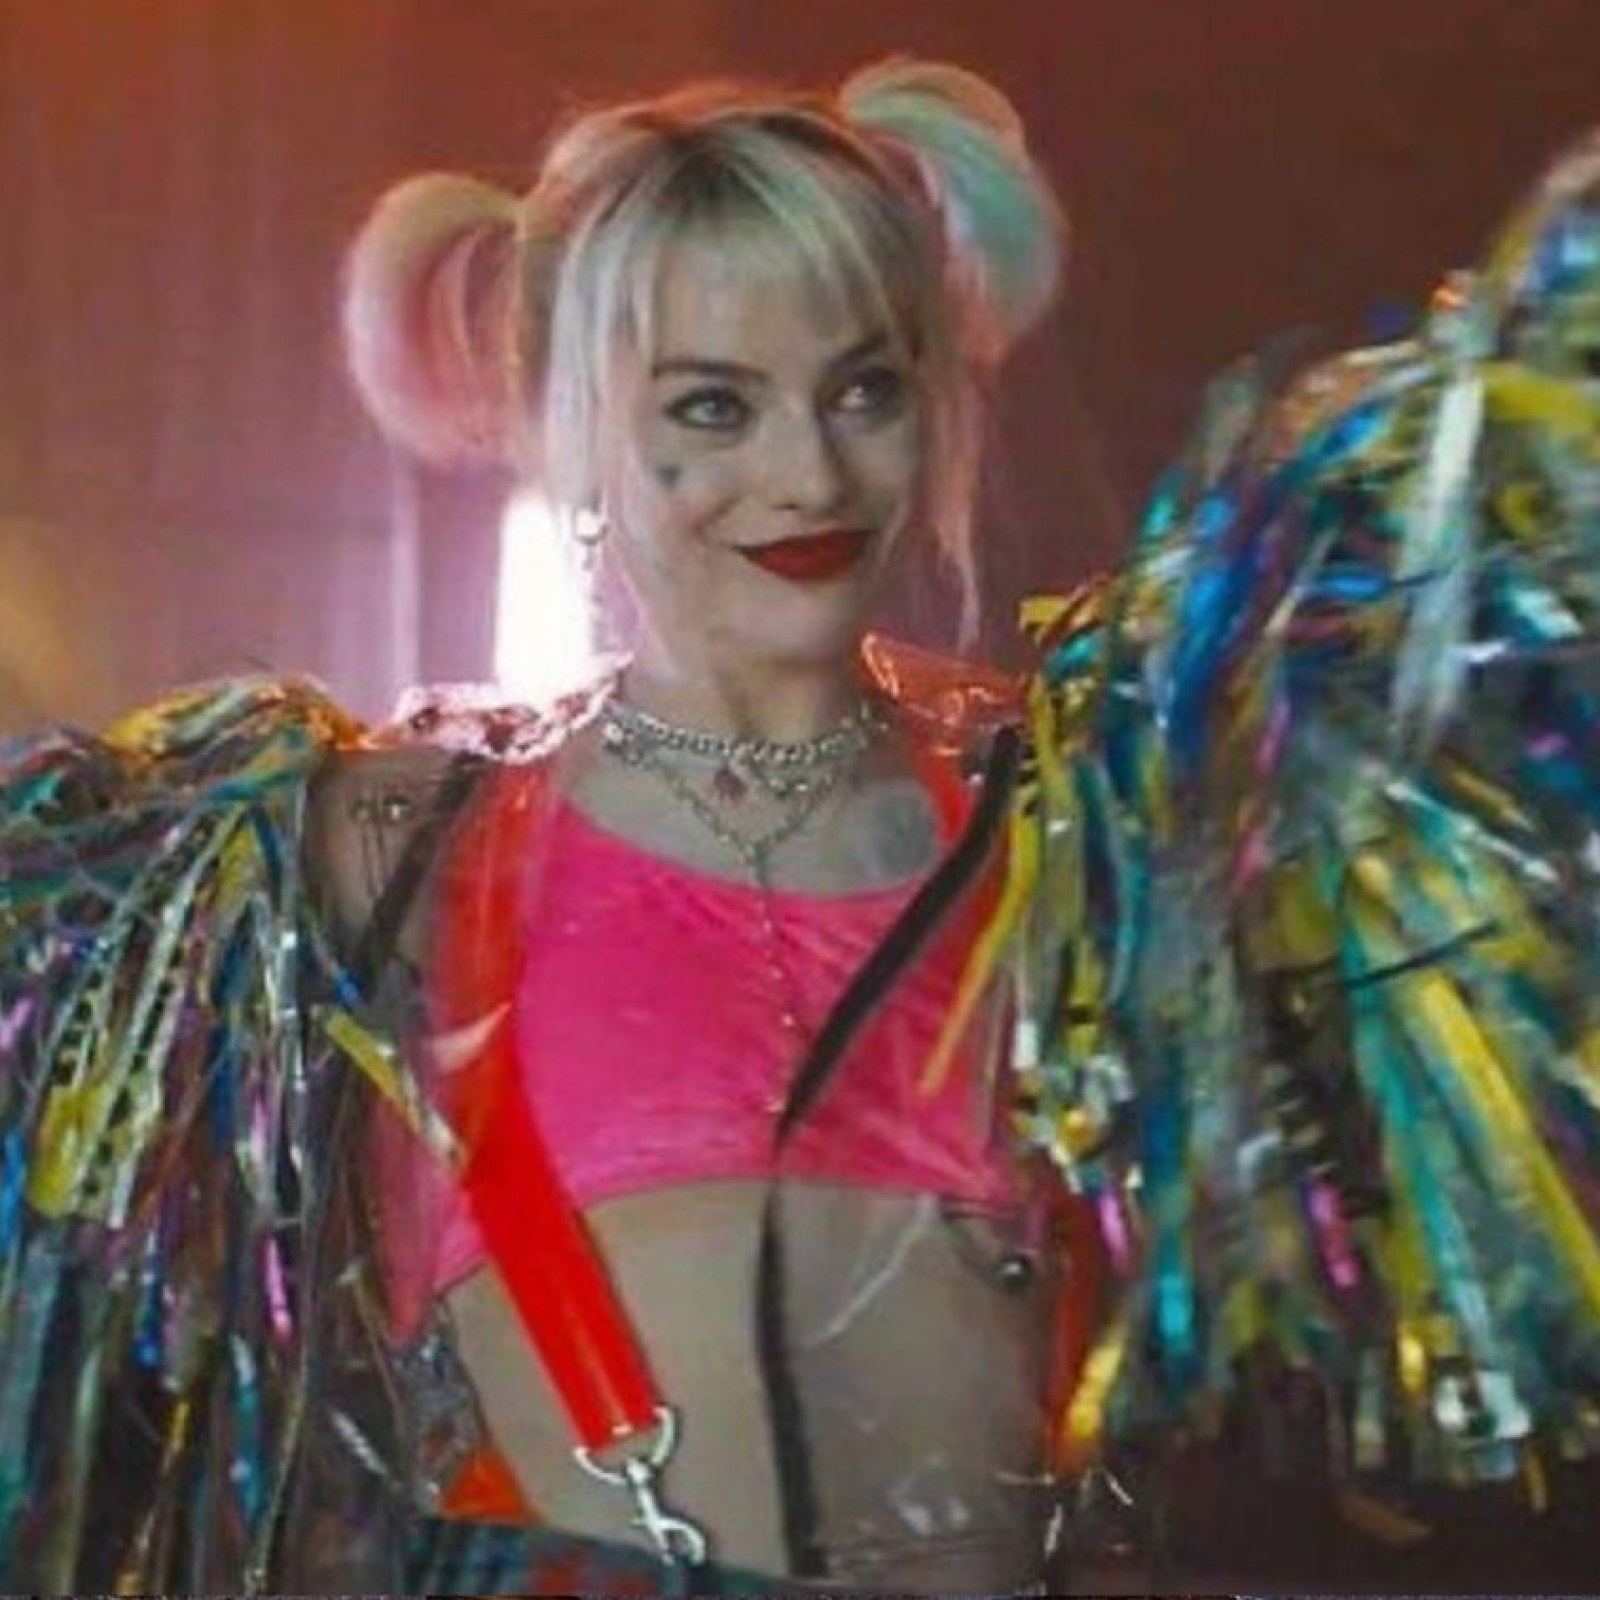 Birds of Prey' Cast: Which Superheroes Appear in the Movie and Who